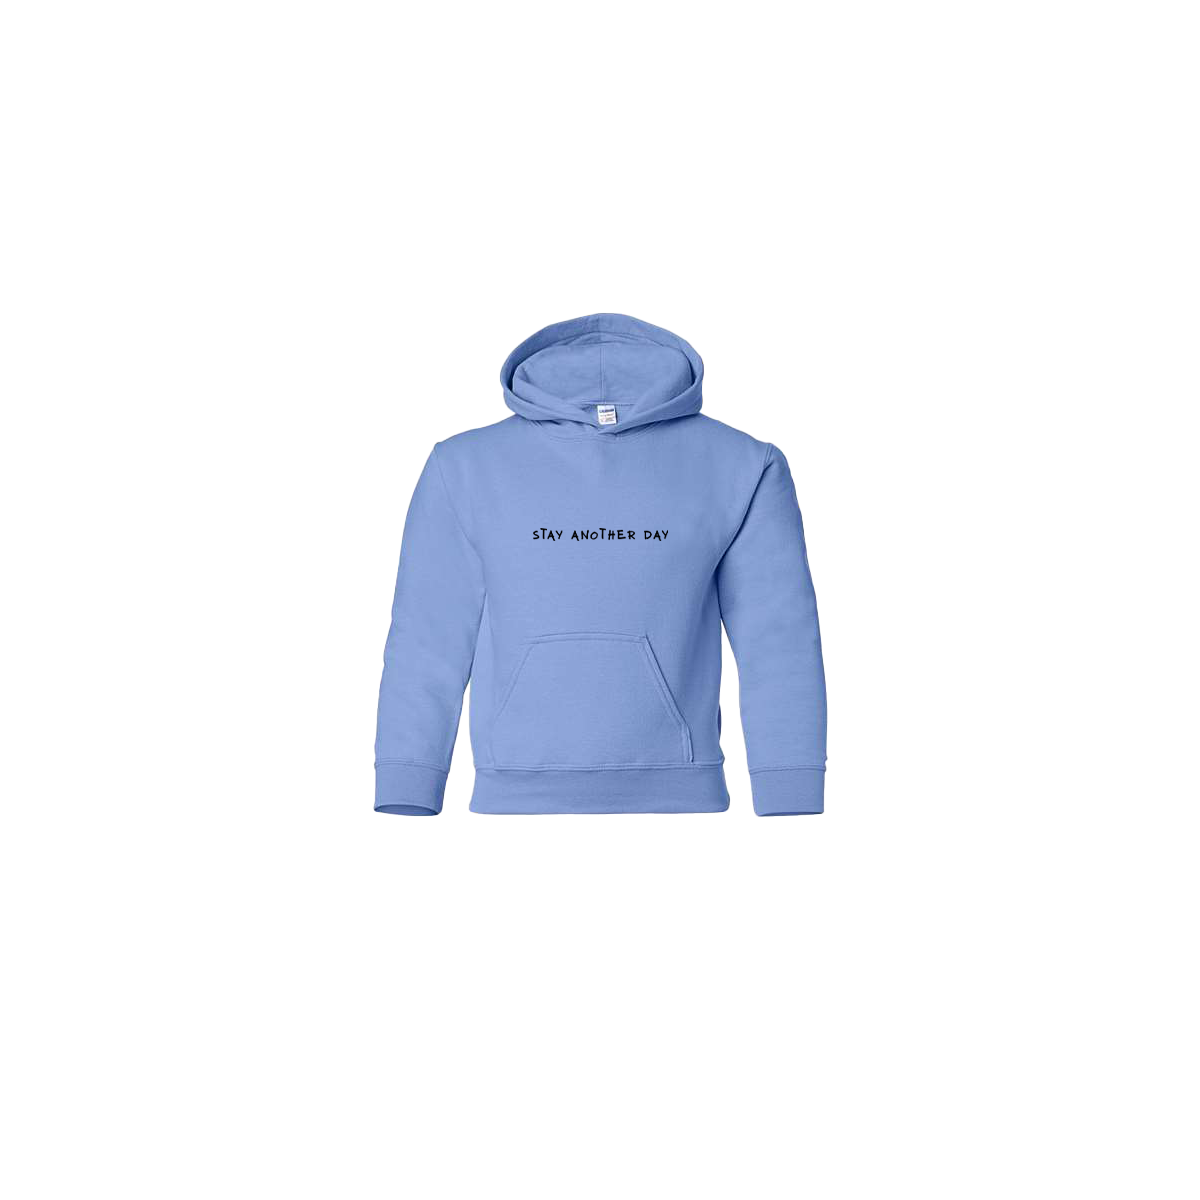 Stay Another Day Text Embroidered Light Blue Youth Hoodie